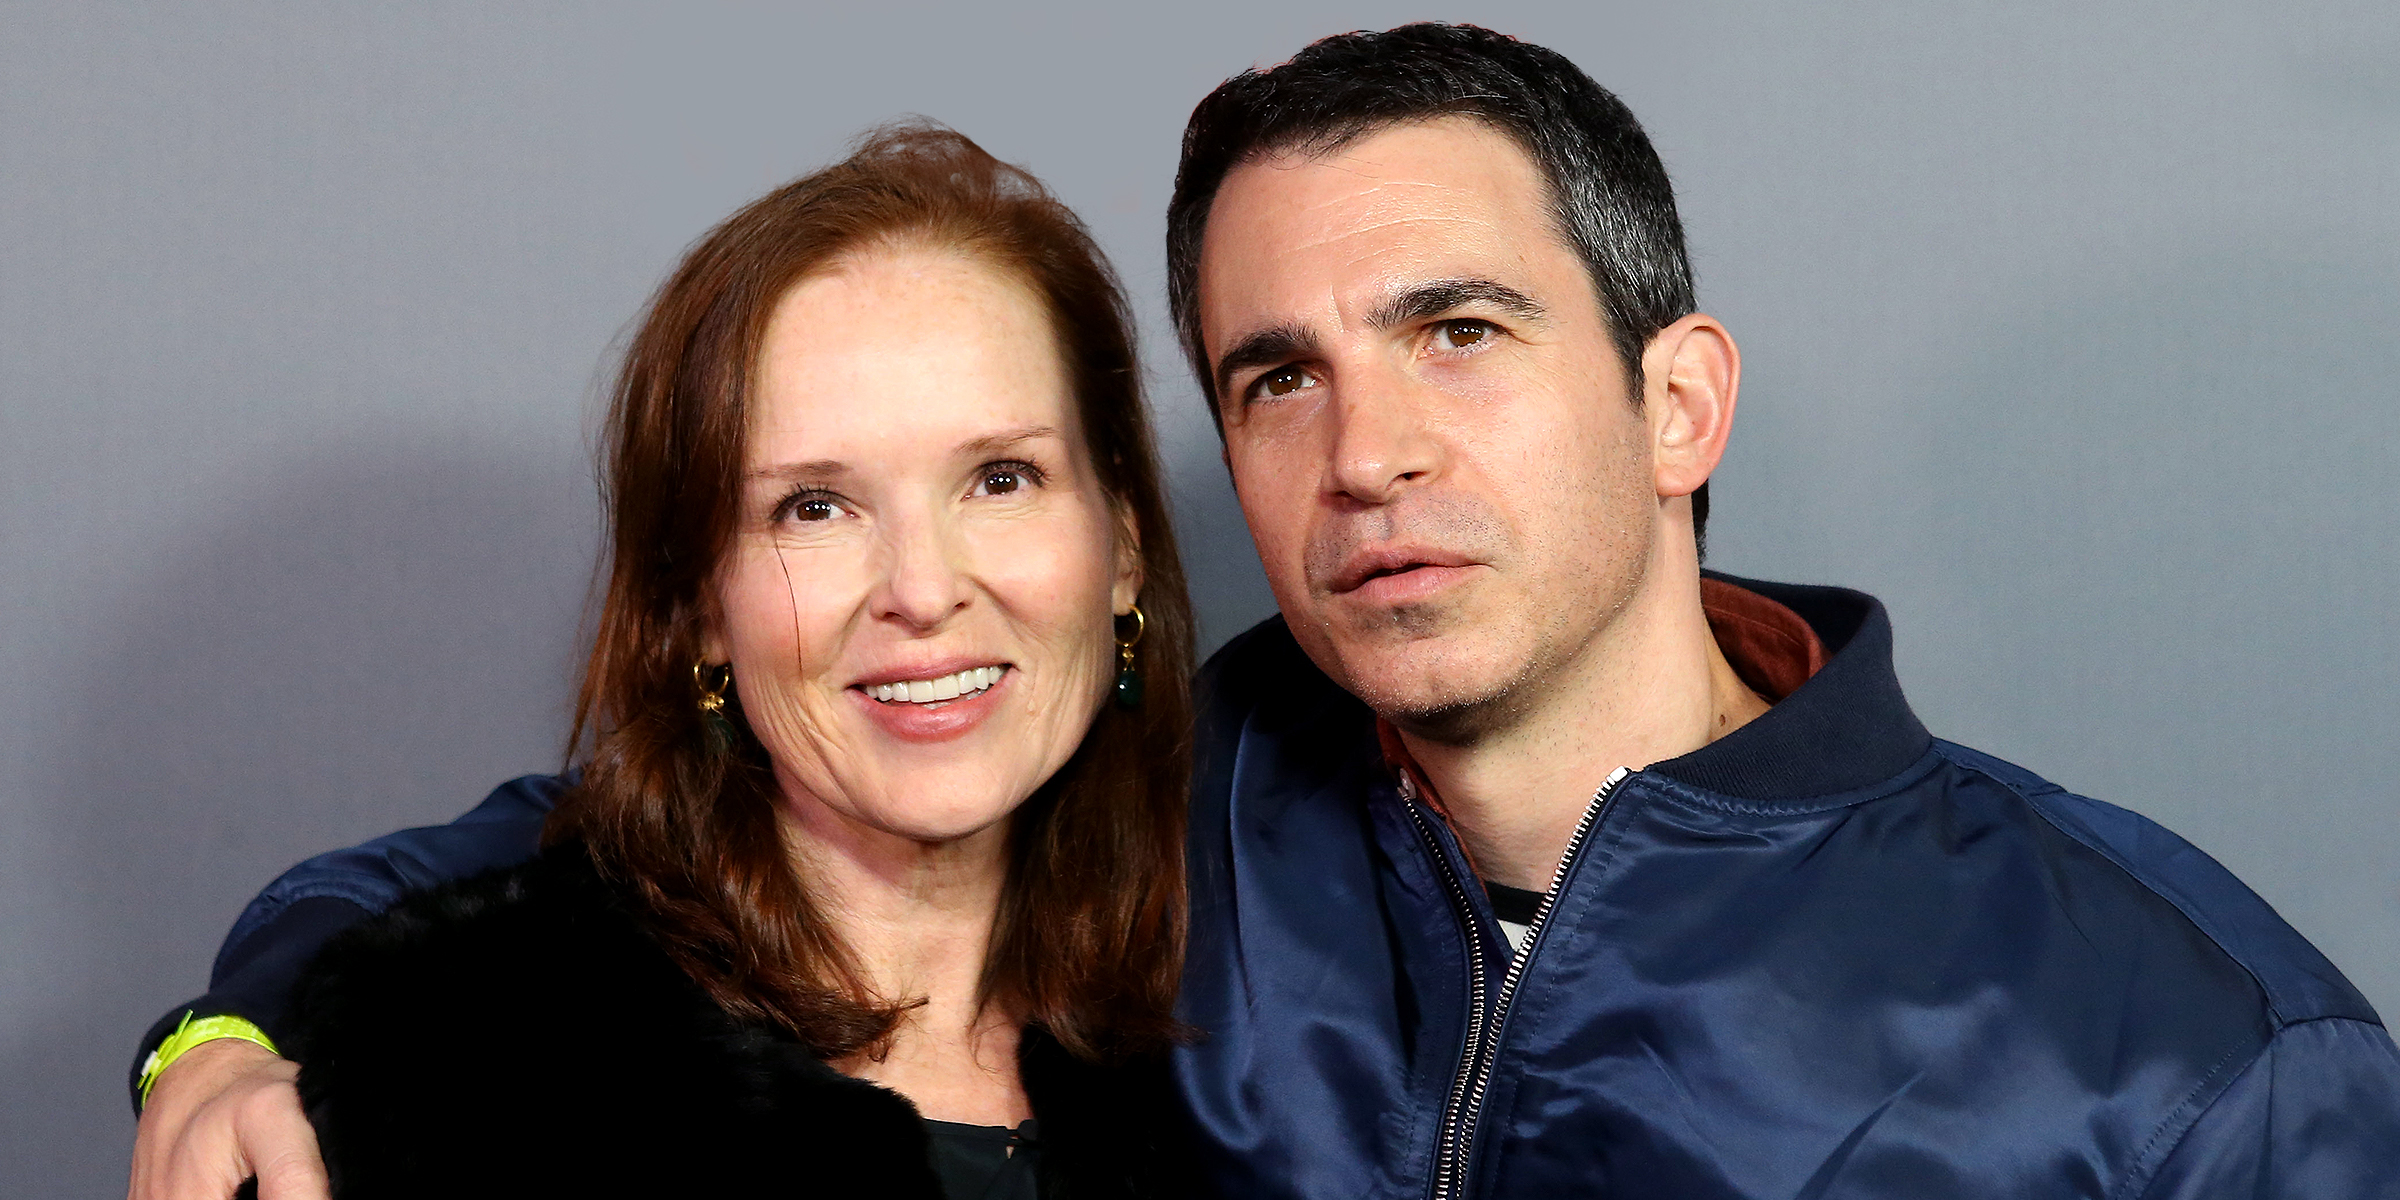 Jennifer Todd and Chris Messina. | Source: Getty Images